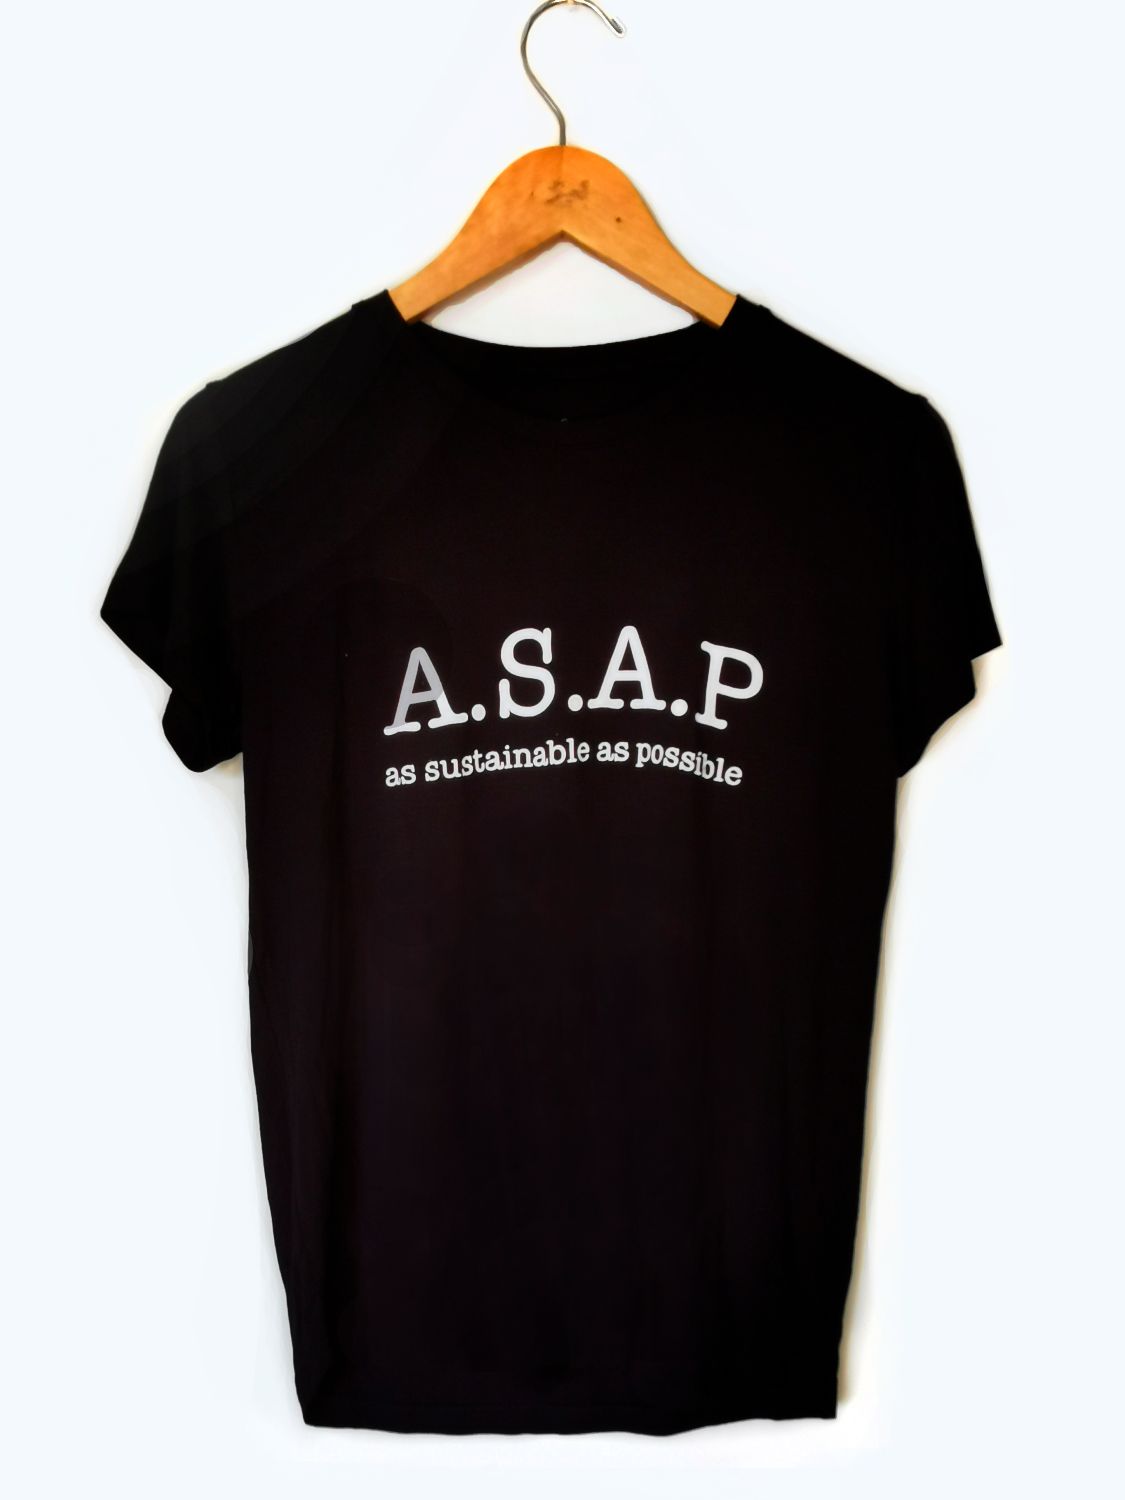 Camisa "A.S.A.P."